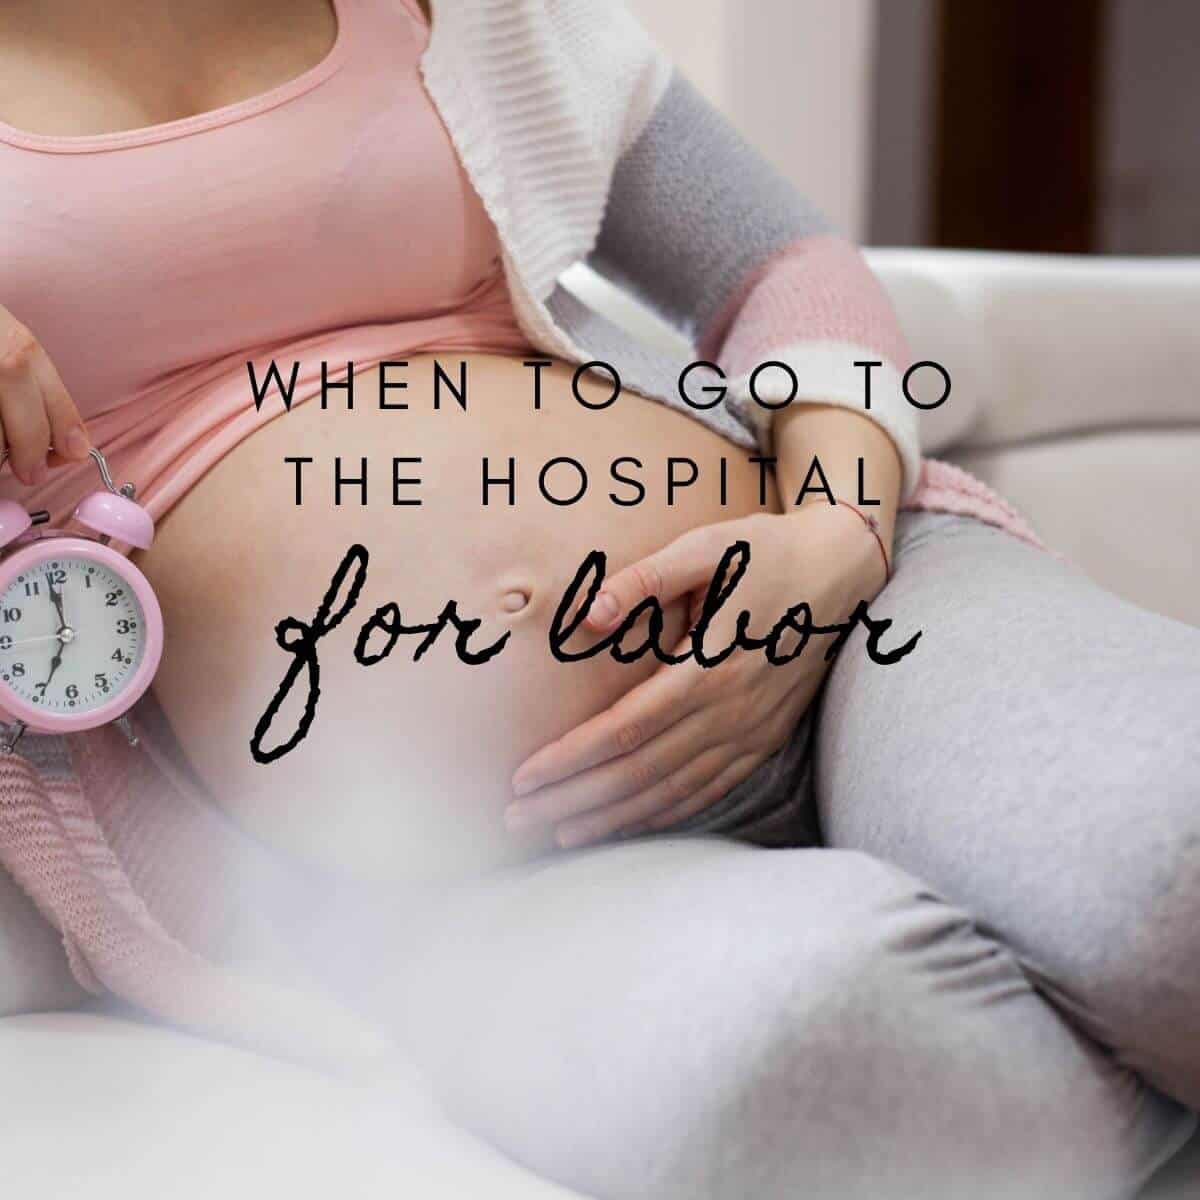 When to go to the hospital for labor (text) rests on top of a photo of a pregnant woman's belly. The woman is holding a clock.